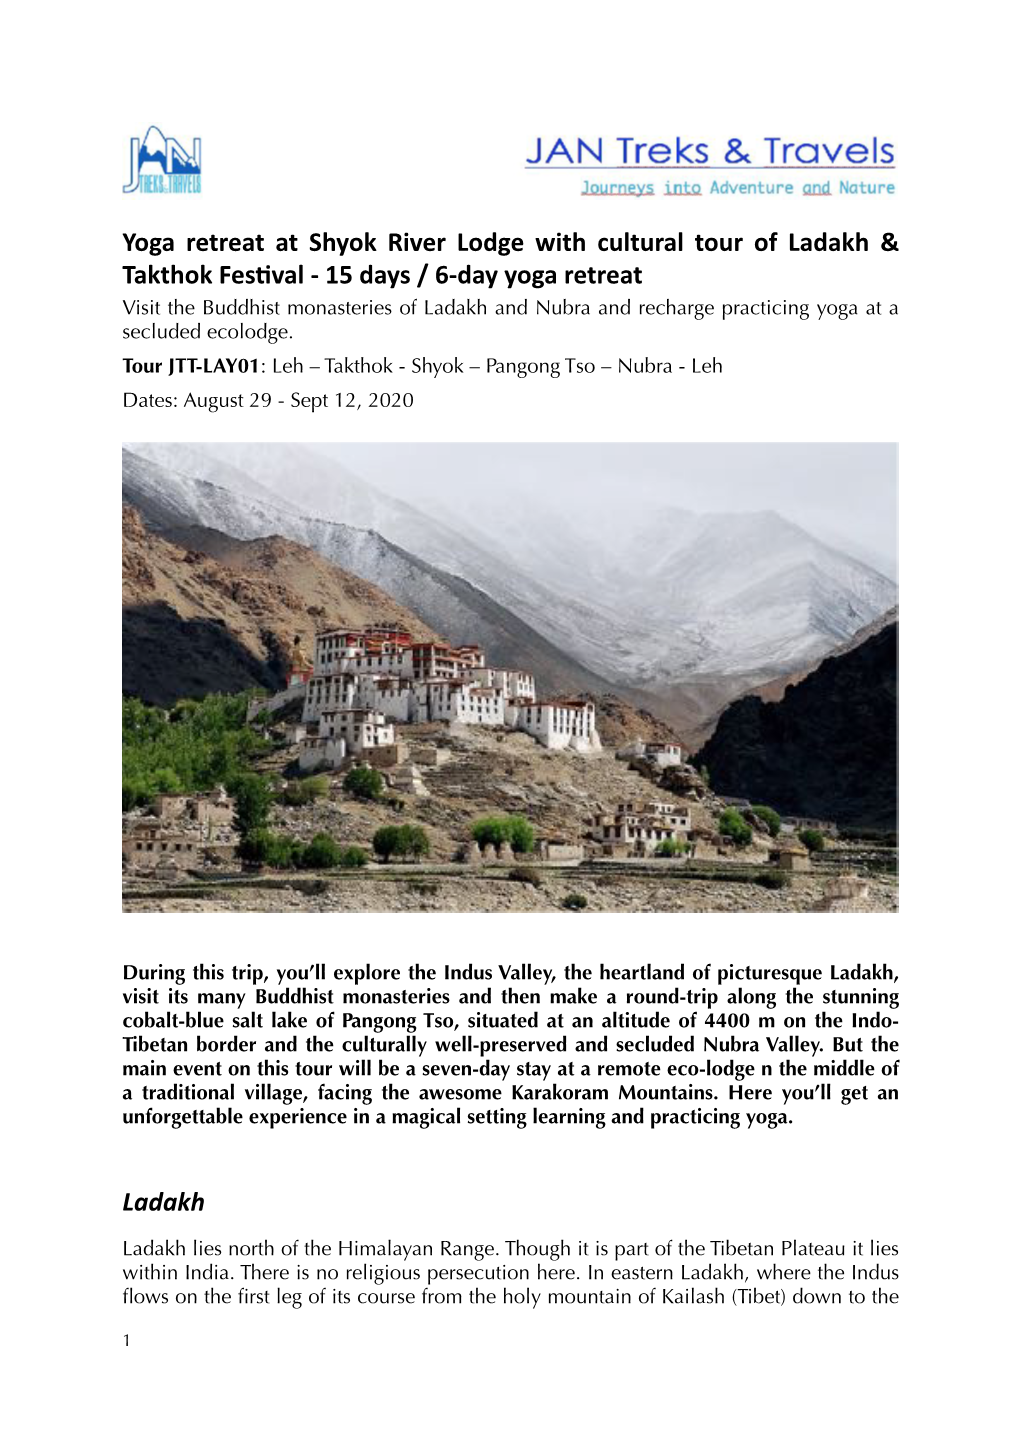 Yoga Retreat at Shyok River Lodge with Cultural